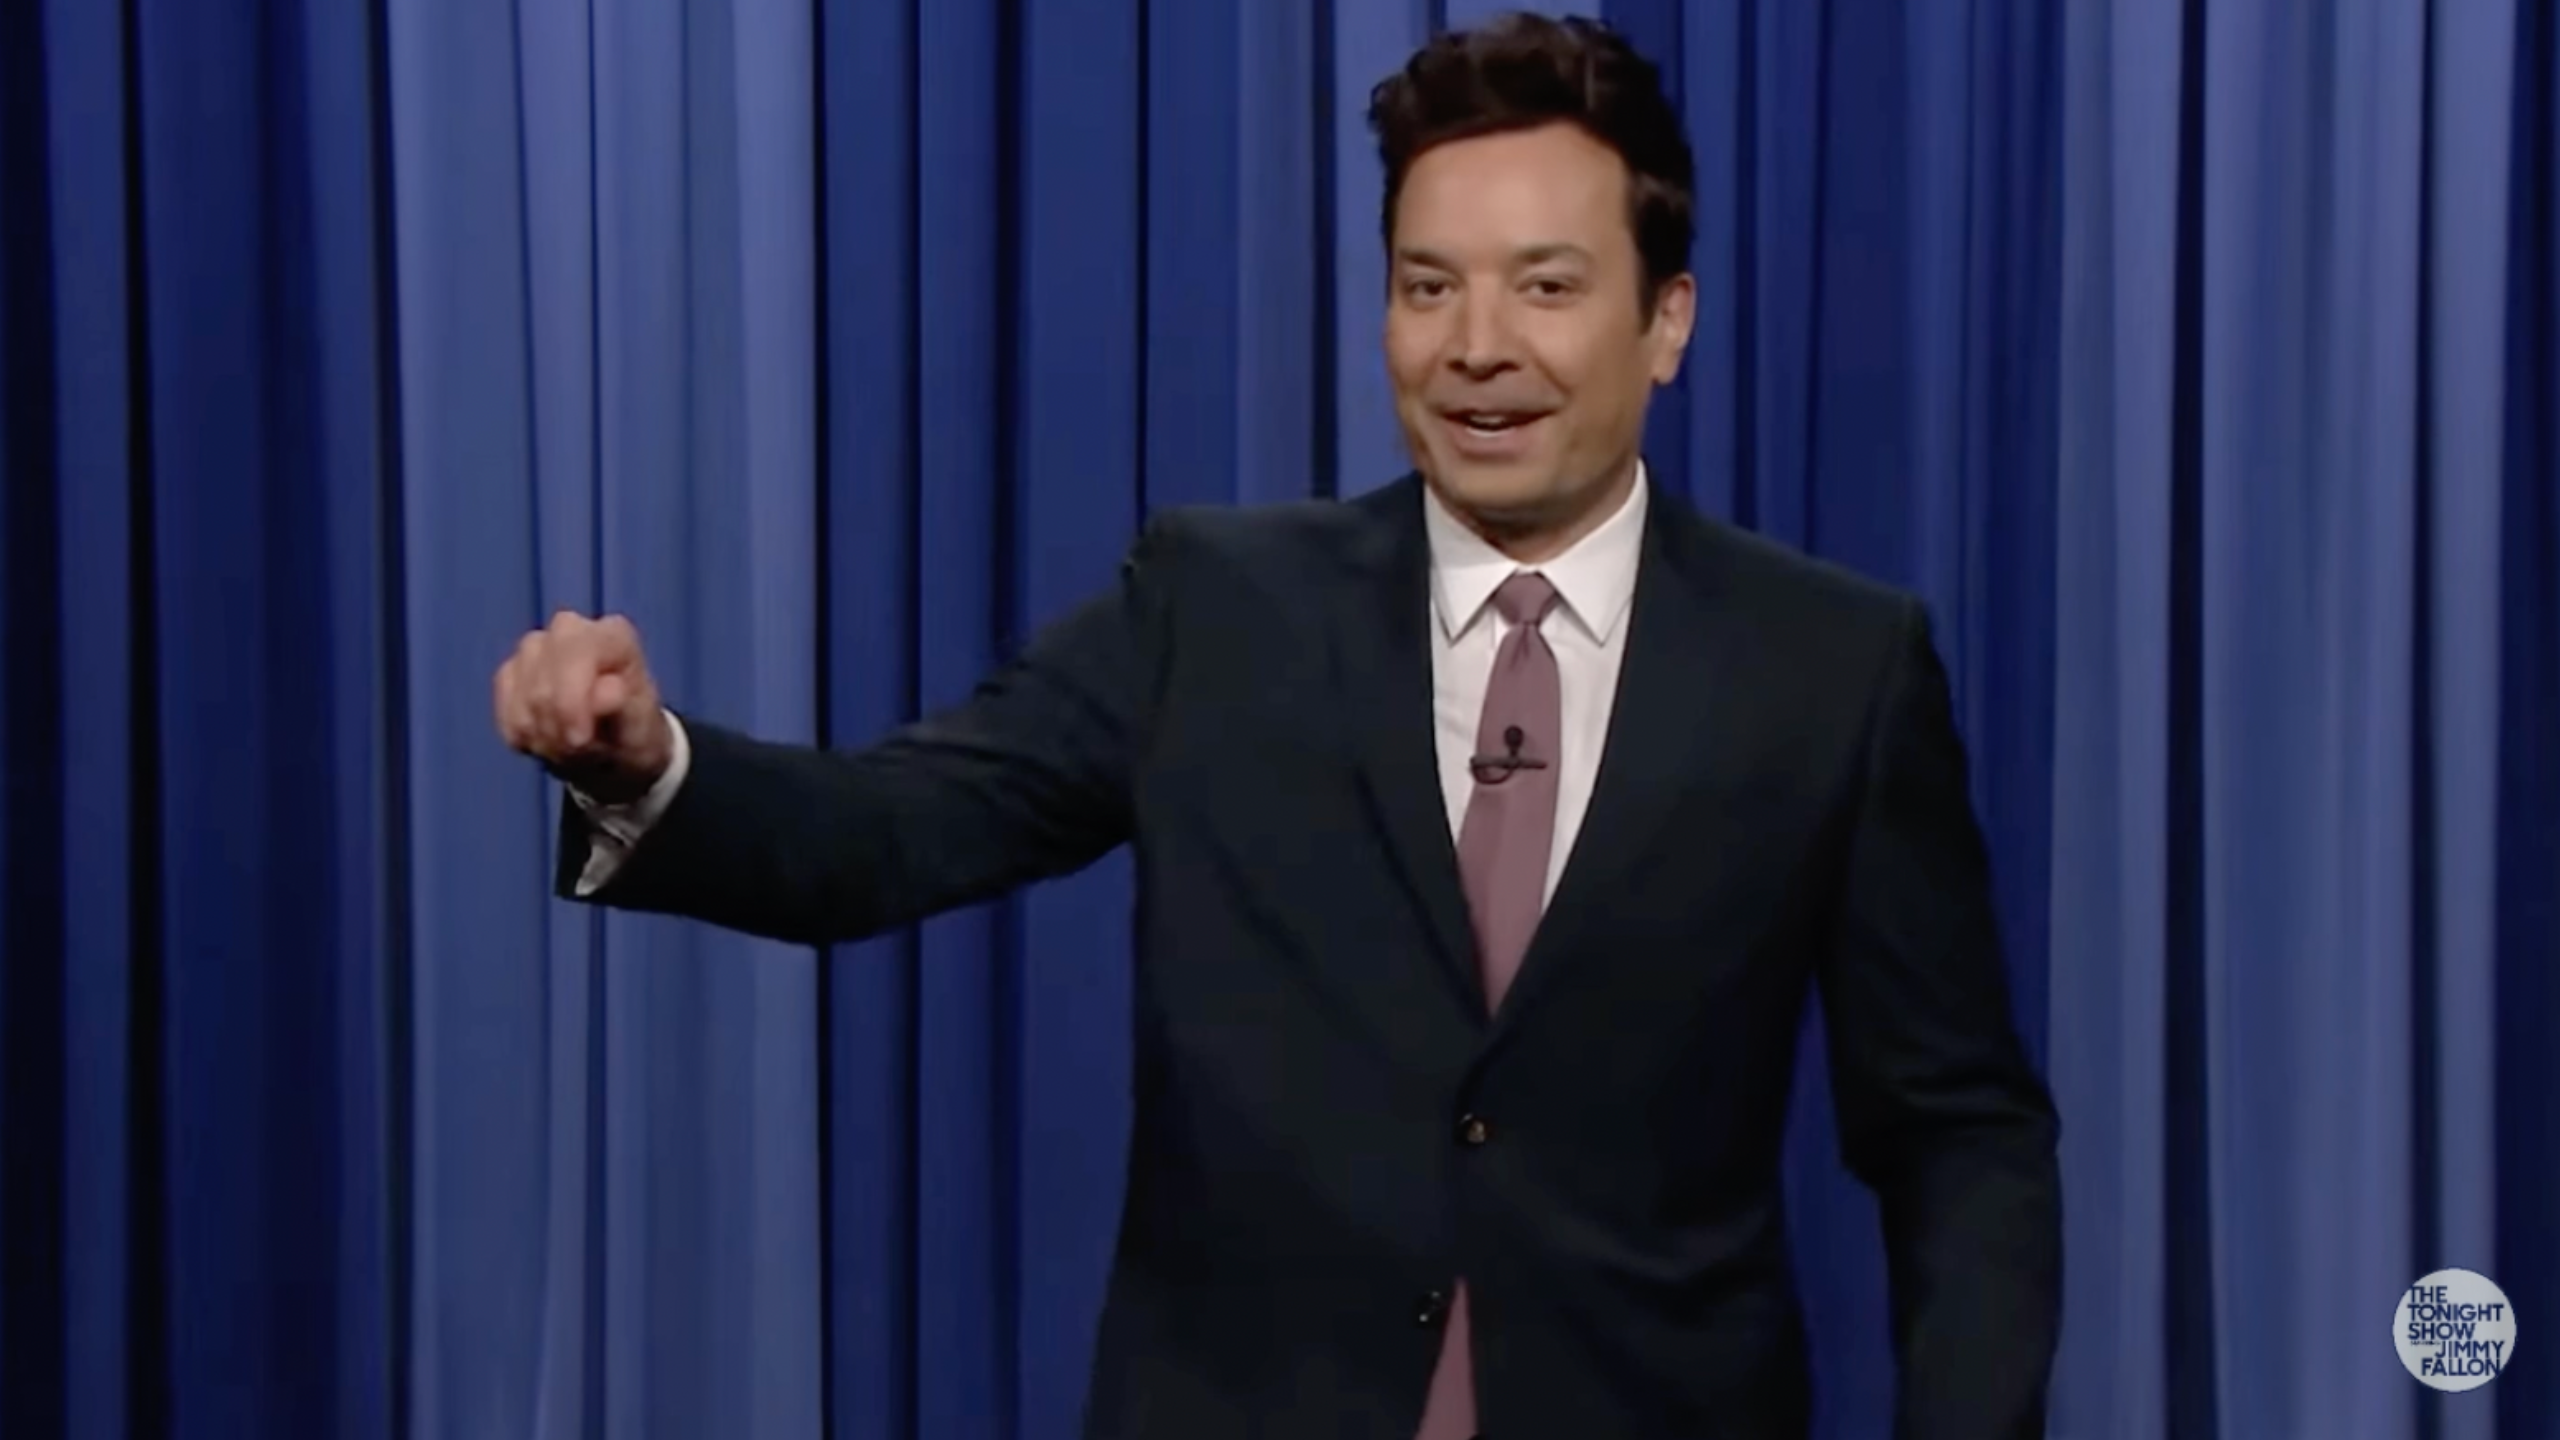 Jimmy Fallon Issues Apology After ‘Toxic’ Workplace Claims From Staff: ‘I Feel So Bad’